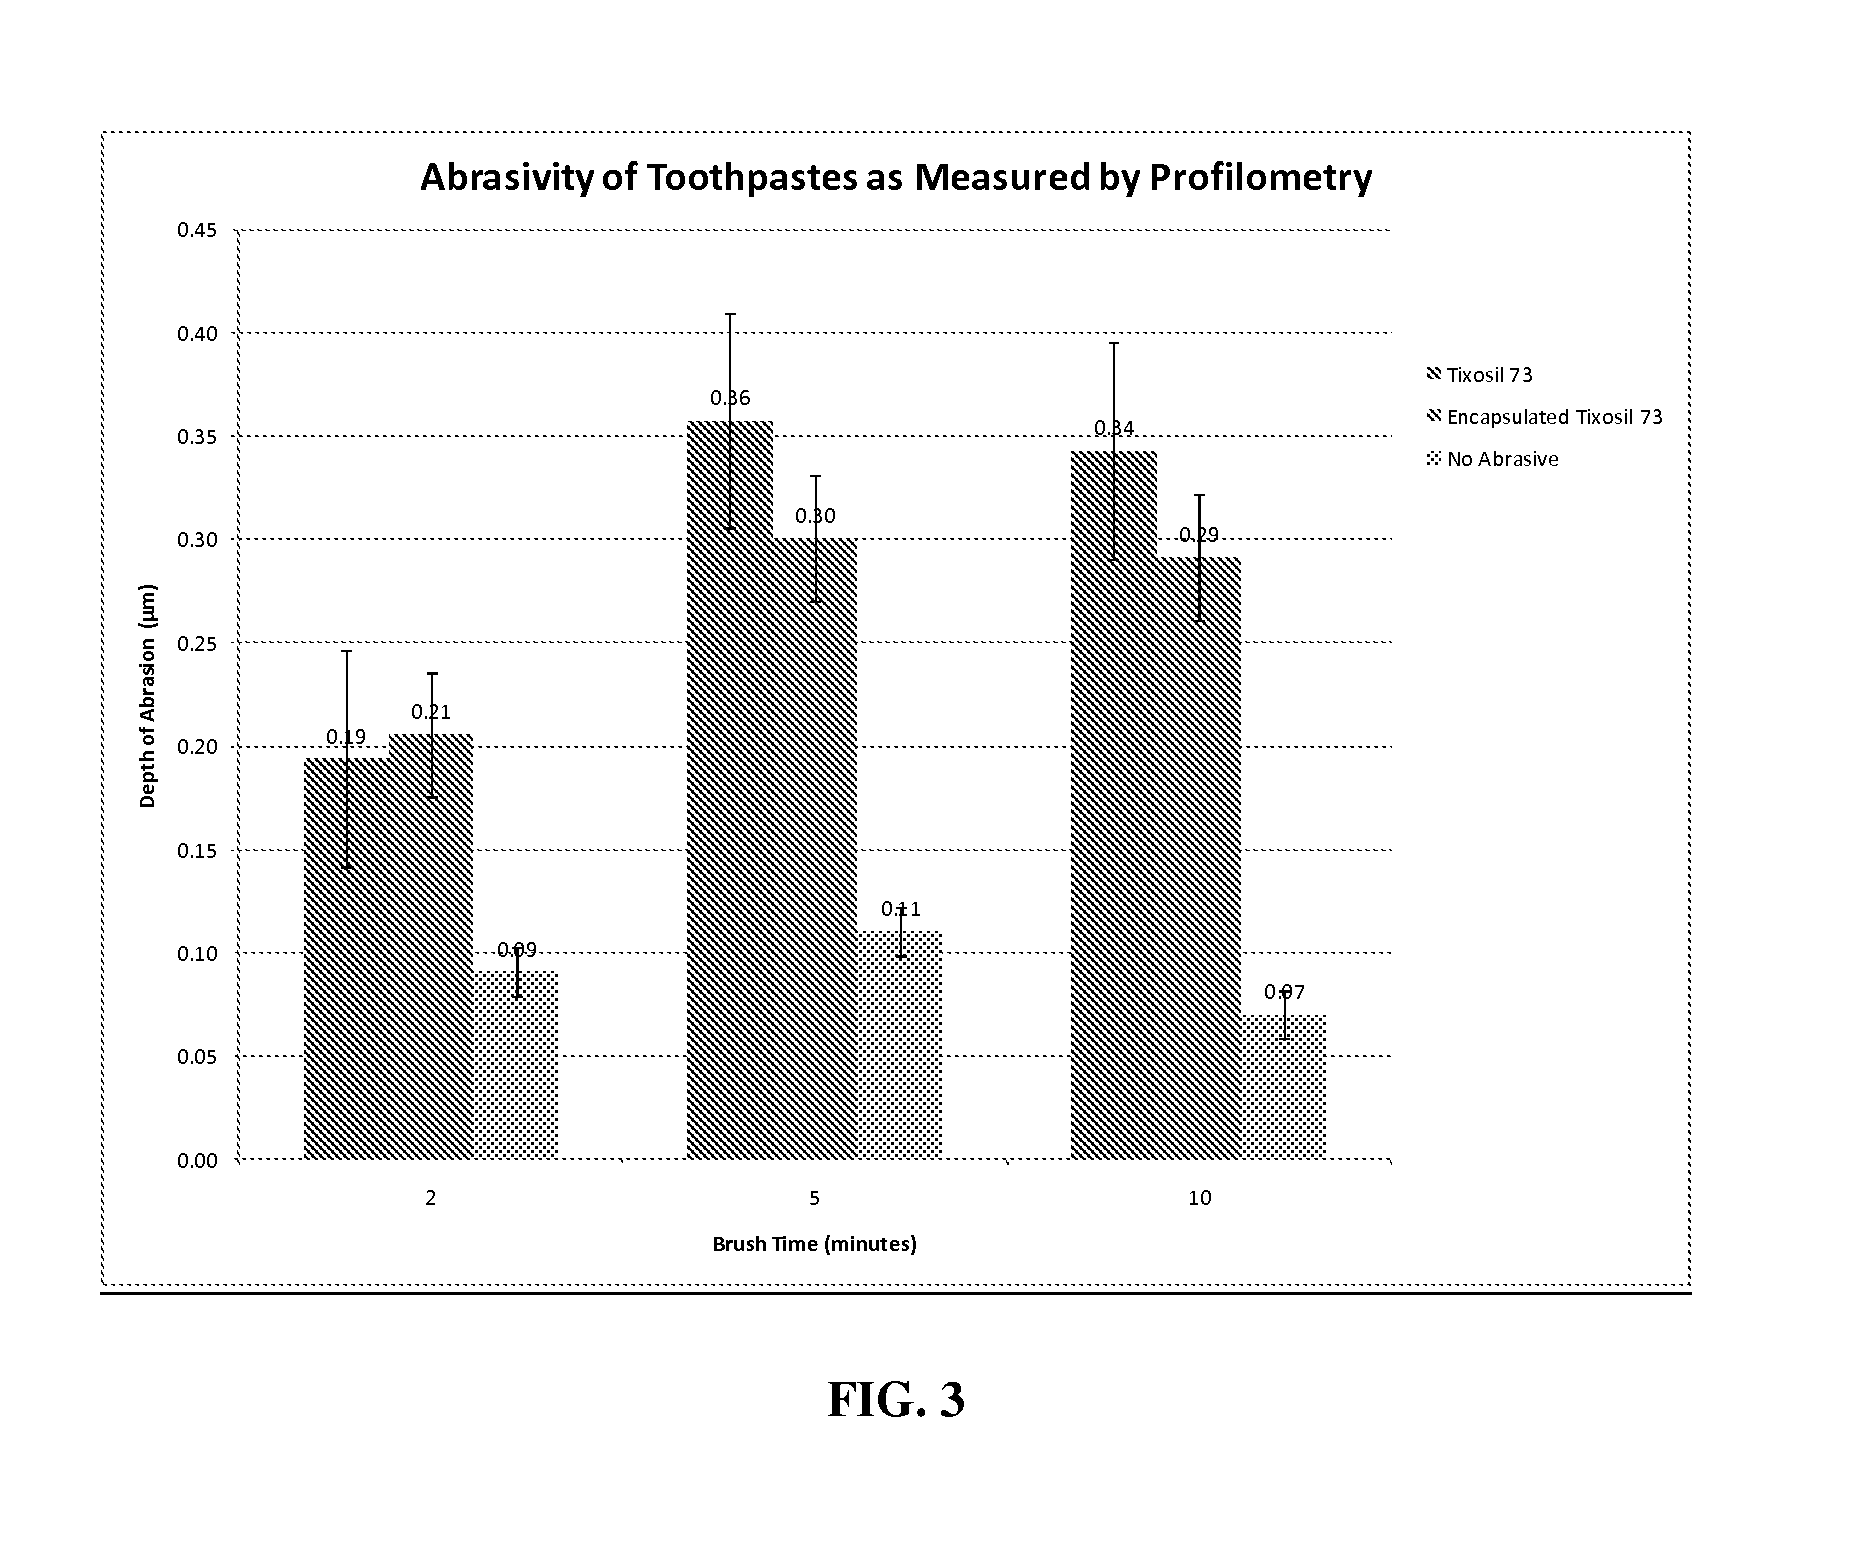 Peroxide-stabilized abrasive tooth whitening compositions, process for preparing and method of use